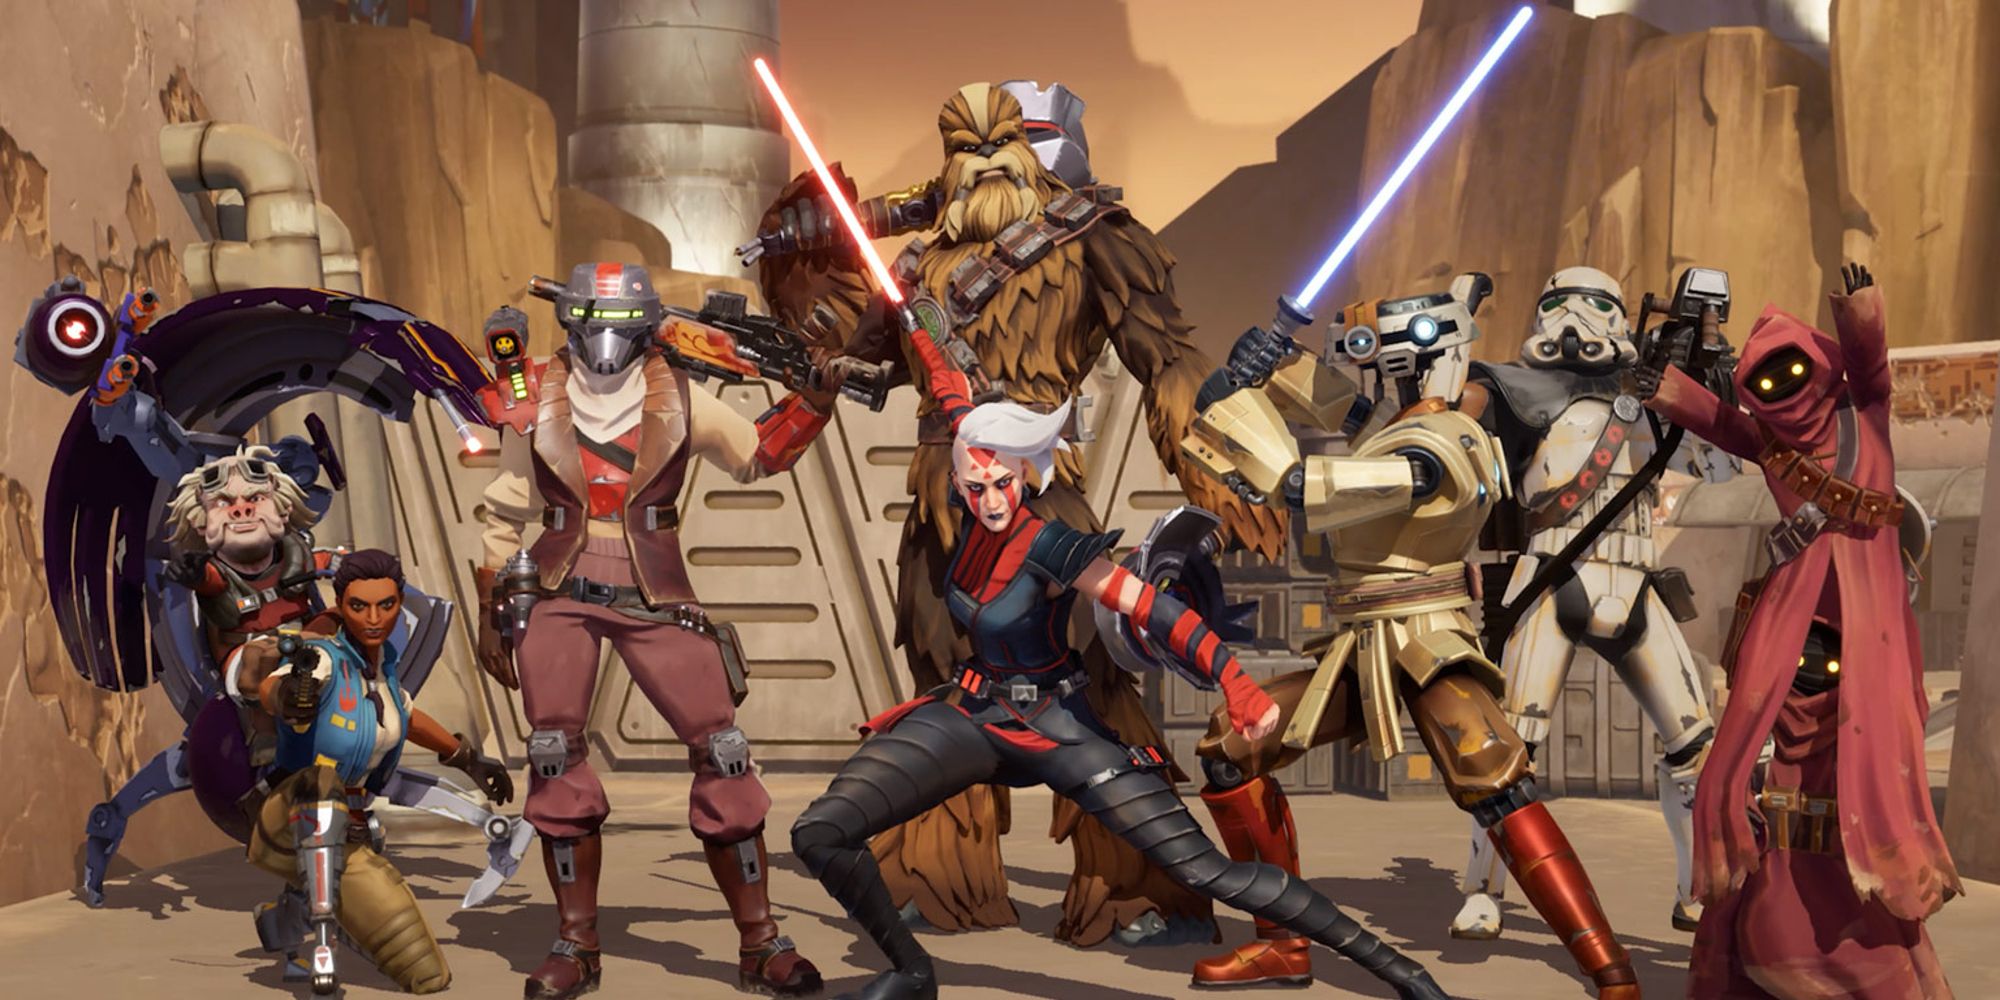 Promo image of the character roster for Star Wars Hunters